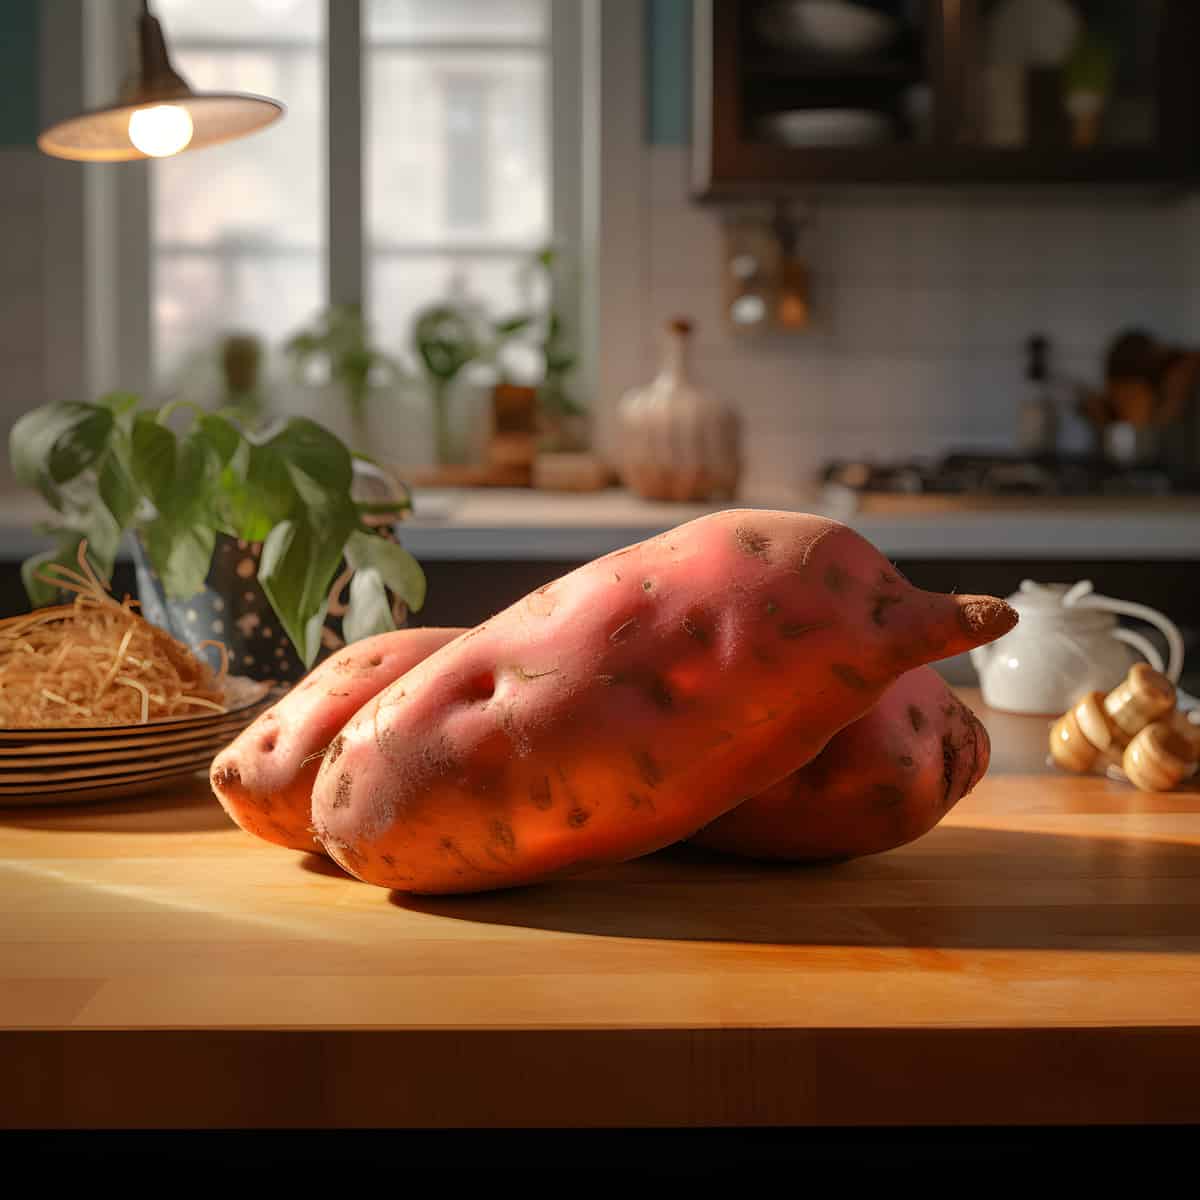 Redglow Sweet Potatoes on a kitchen counter